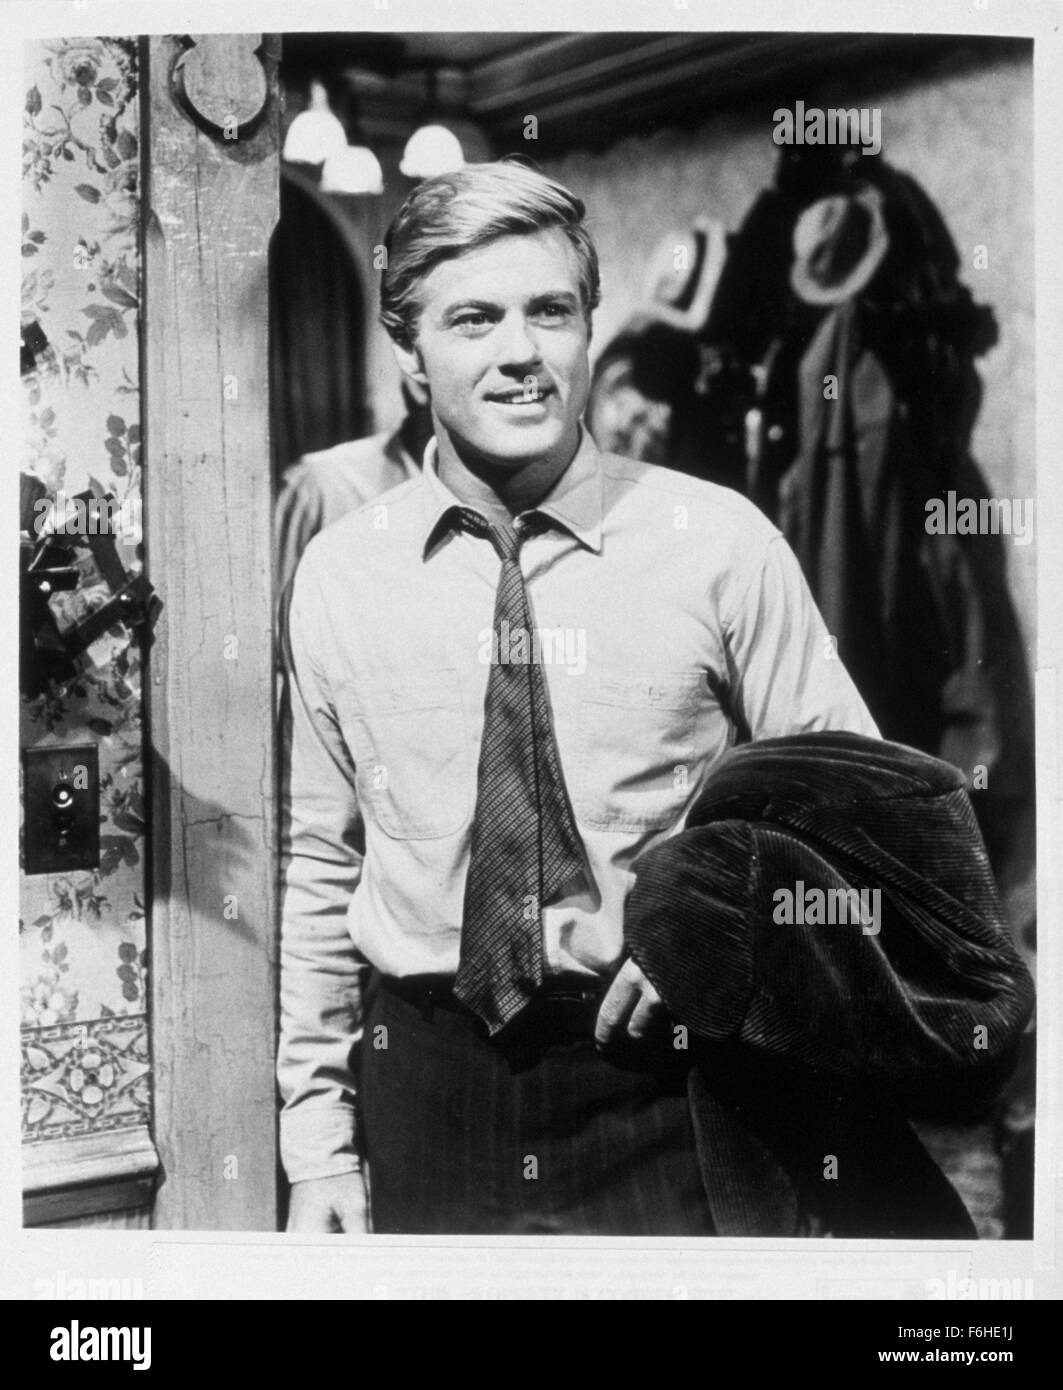 1966, Film Title: THIS PROPERTY IS CONDEMNED, Director: SYDNEY POLLACK, Studio: PARAMOUNT, Pictured: SYDNEY POLLACK. (Credit Image: SNAP) Stock Photo